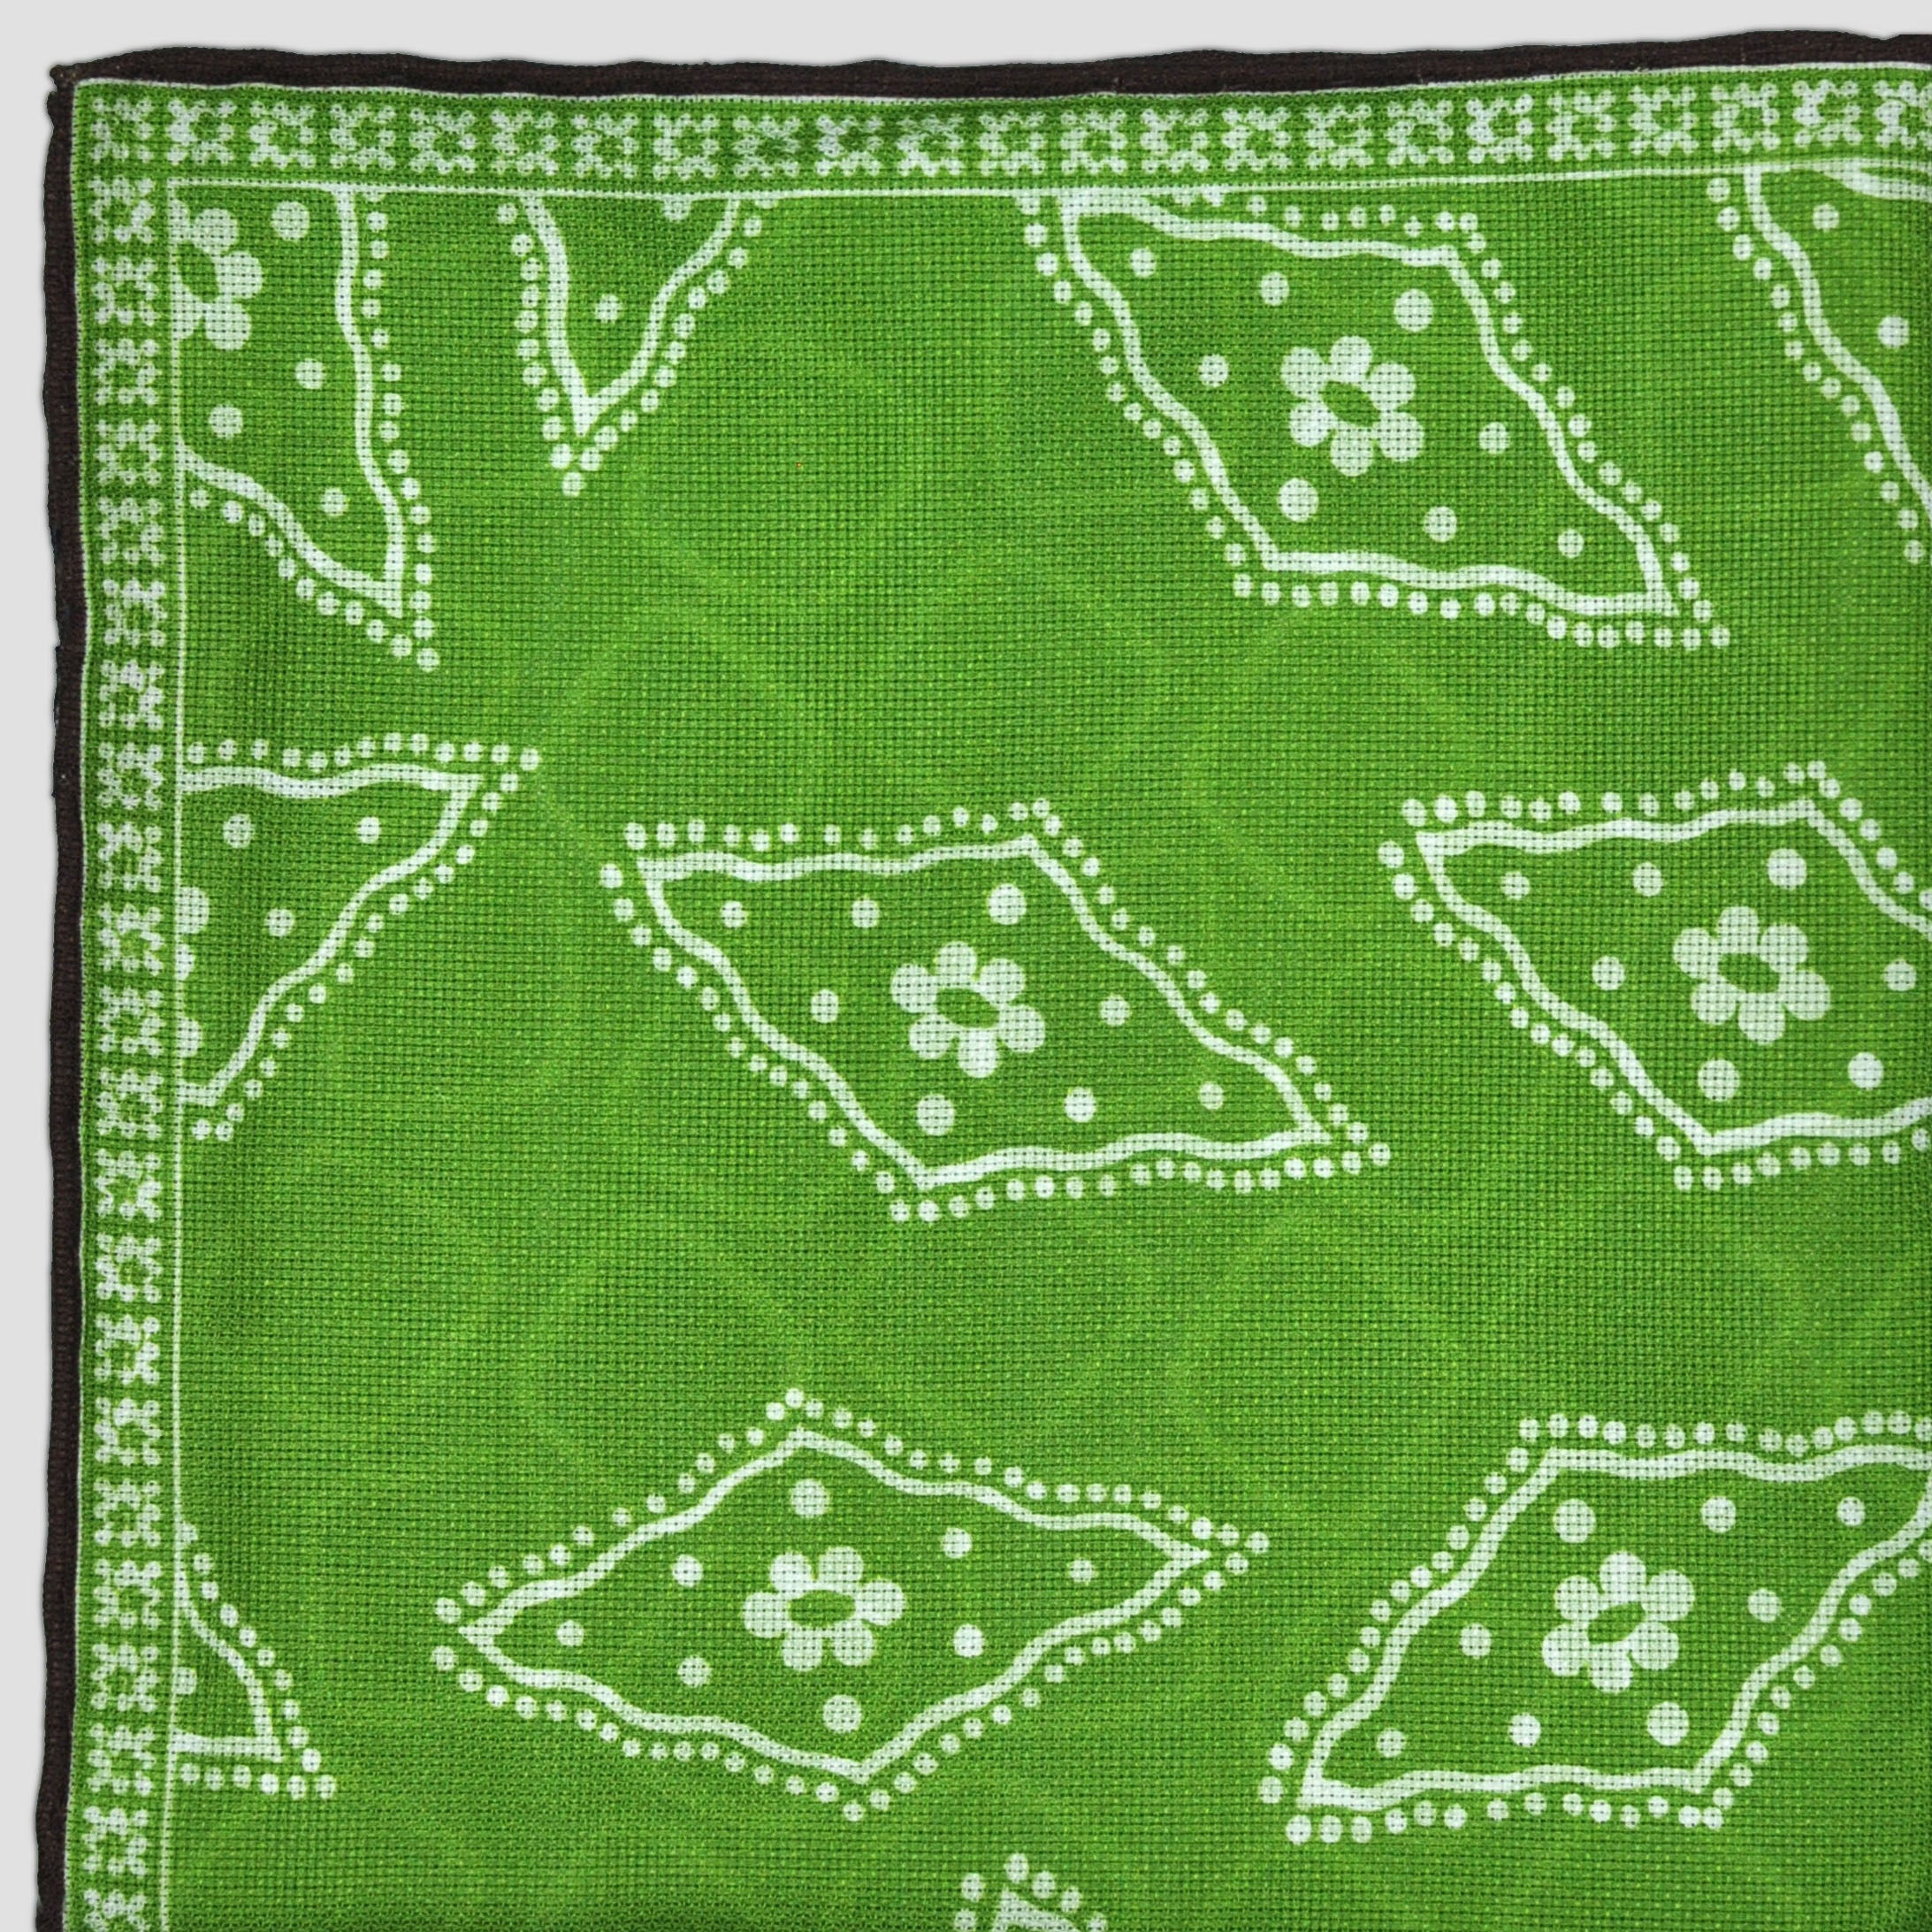 Florets & Geo's Reversible Panama Silk Pocket Square in Lime